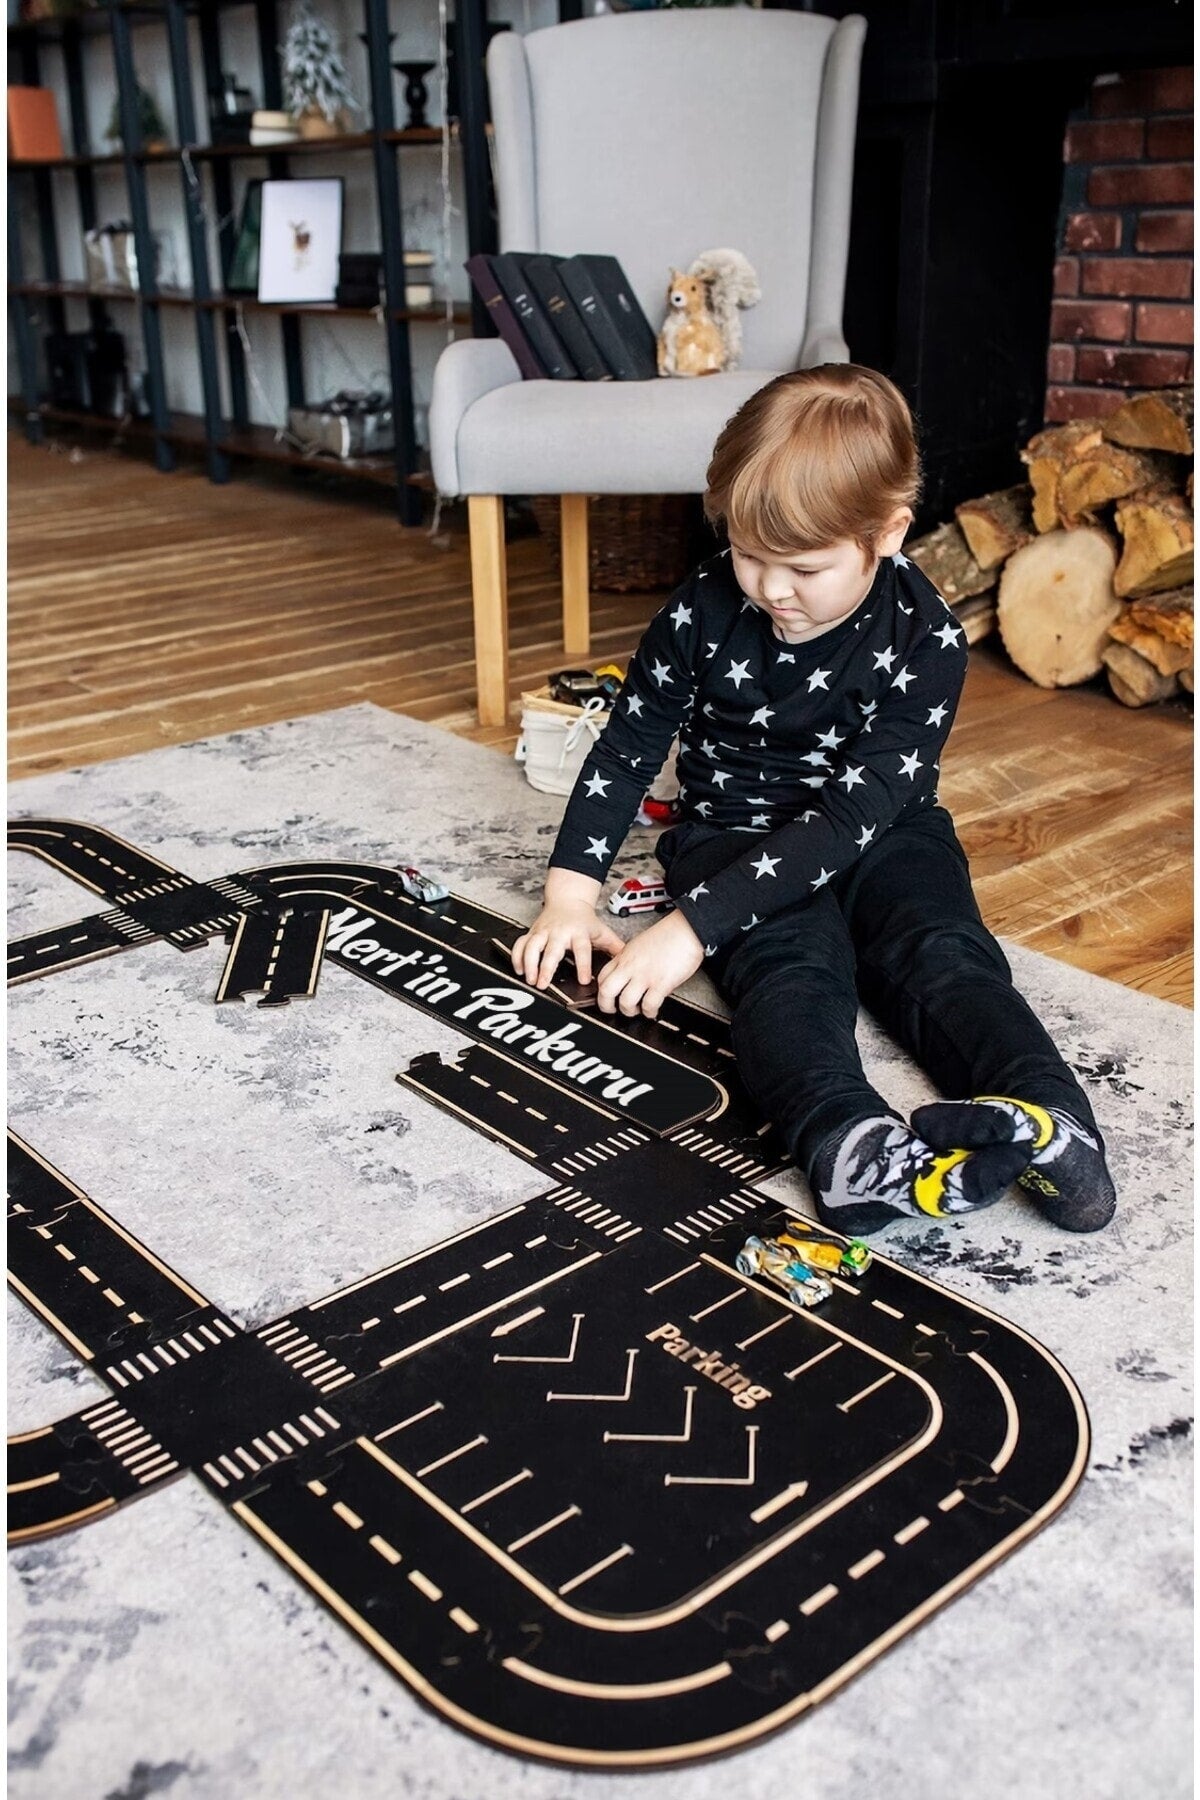 Toy Vehicle Track (medium) -Educational And Fun Road Construction Wooden Toy - Highway Puzzle